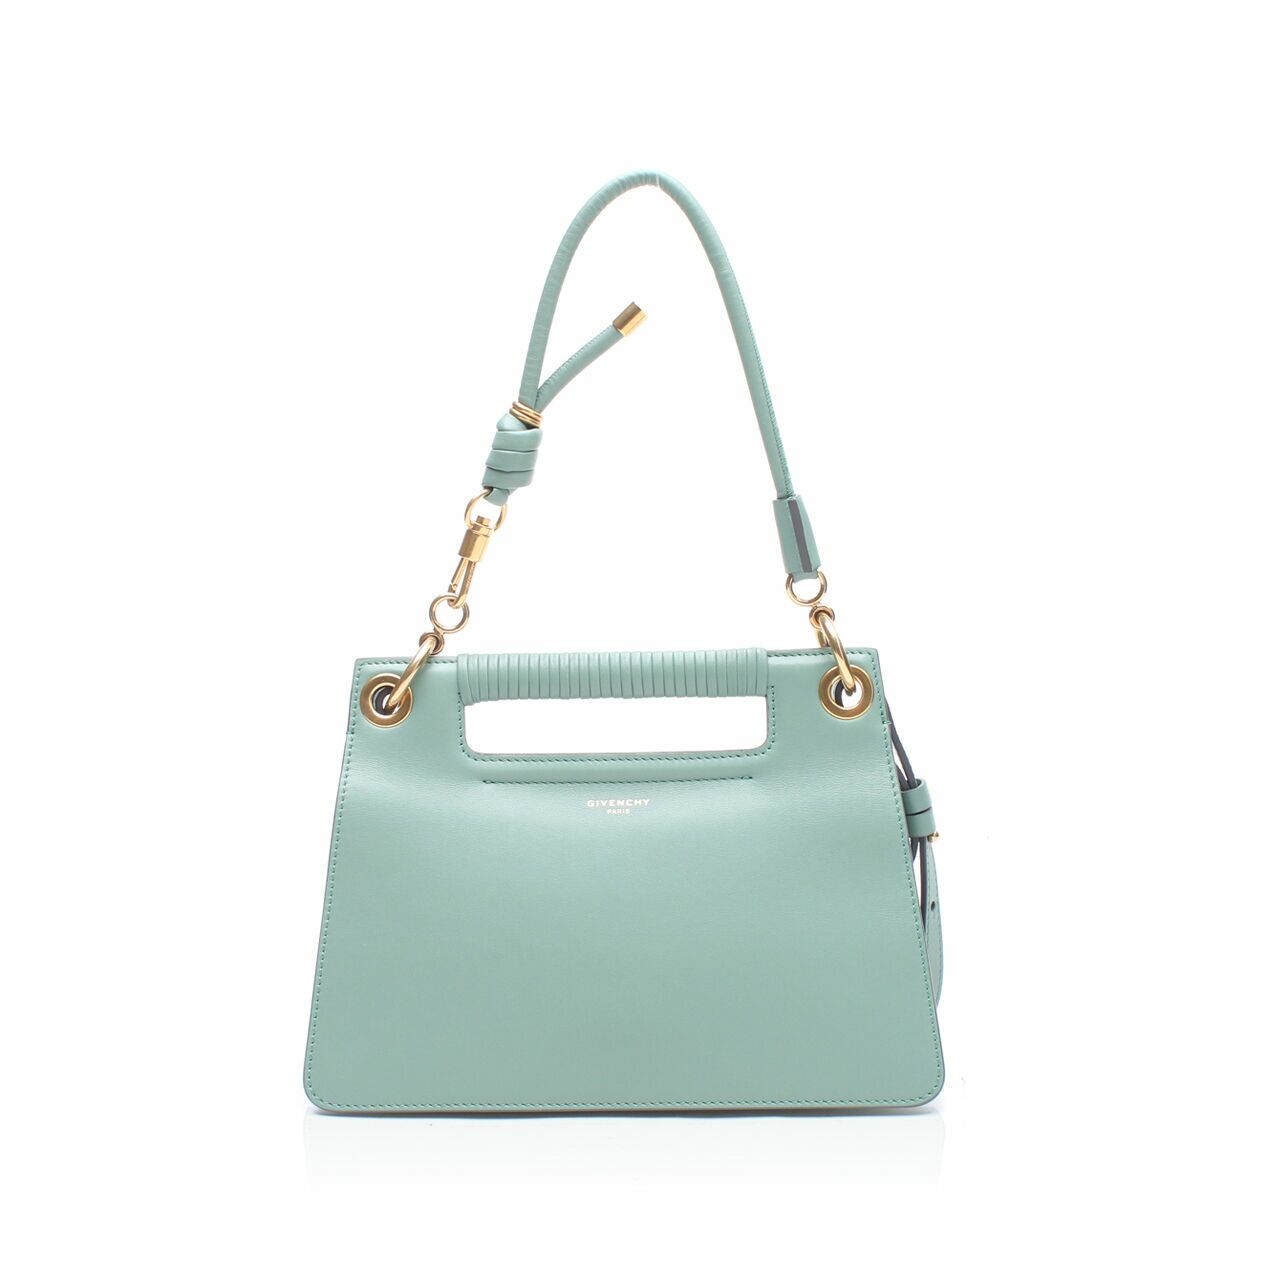 Givenchy Whip Small Green Satchel Bag